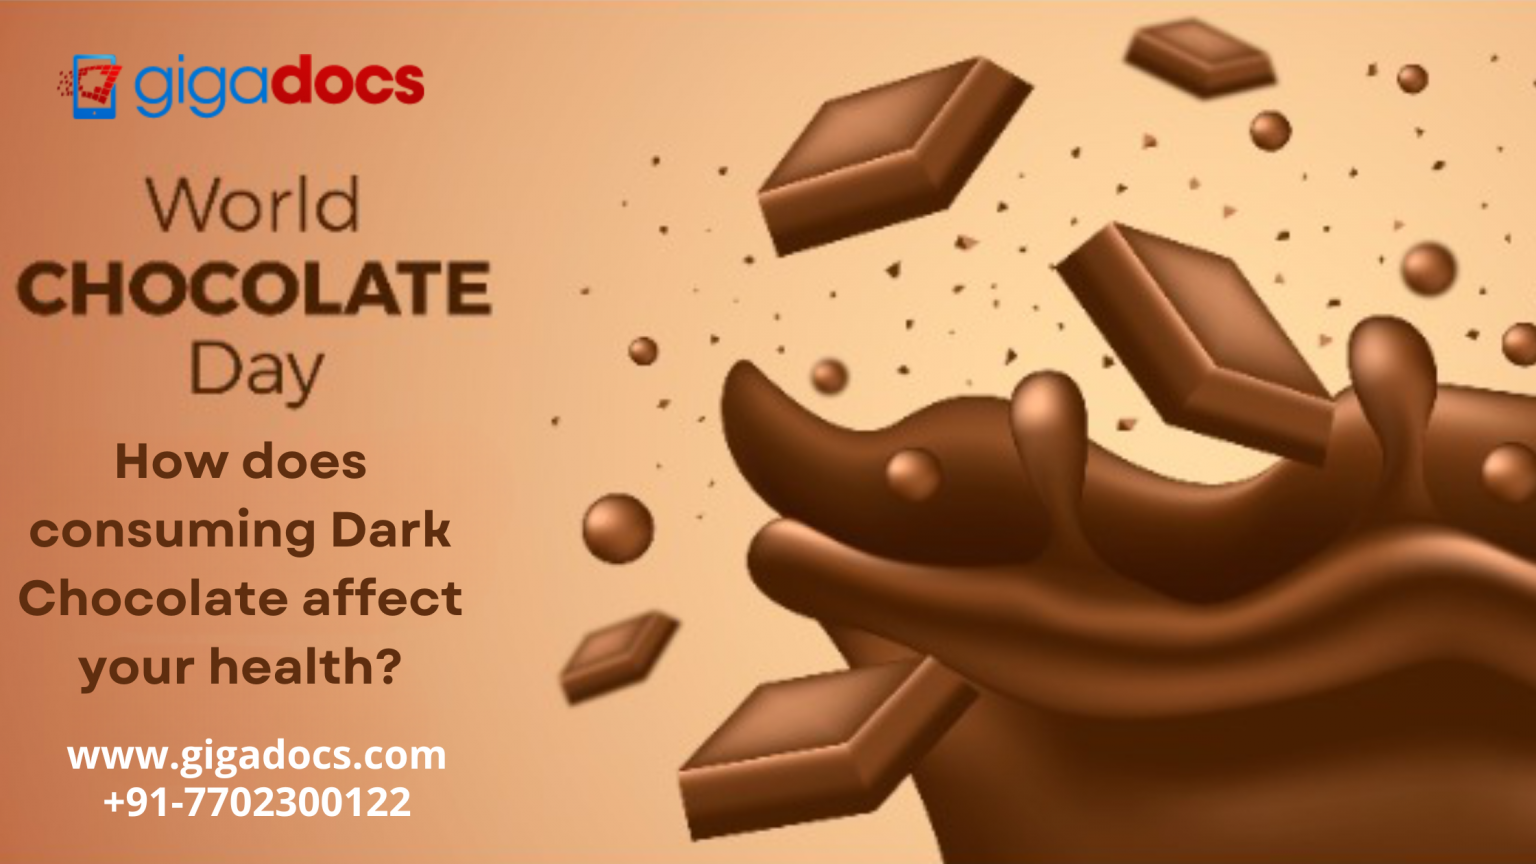 How Does Consuming Dark Chocolate Affect Your Health Gigadocs 1536x864 